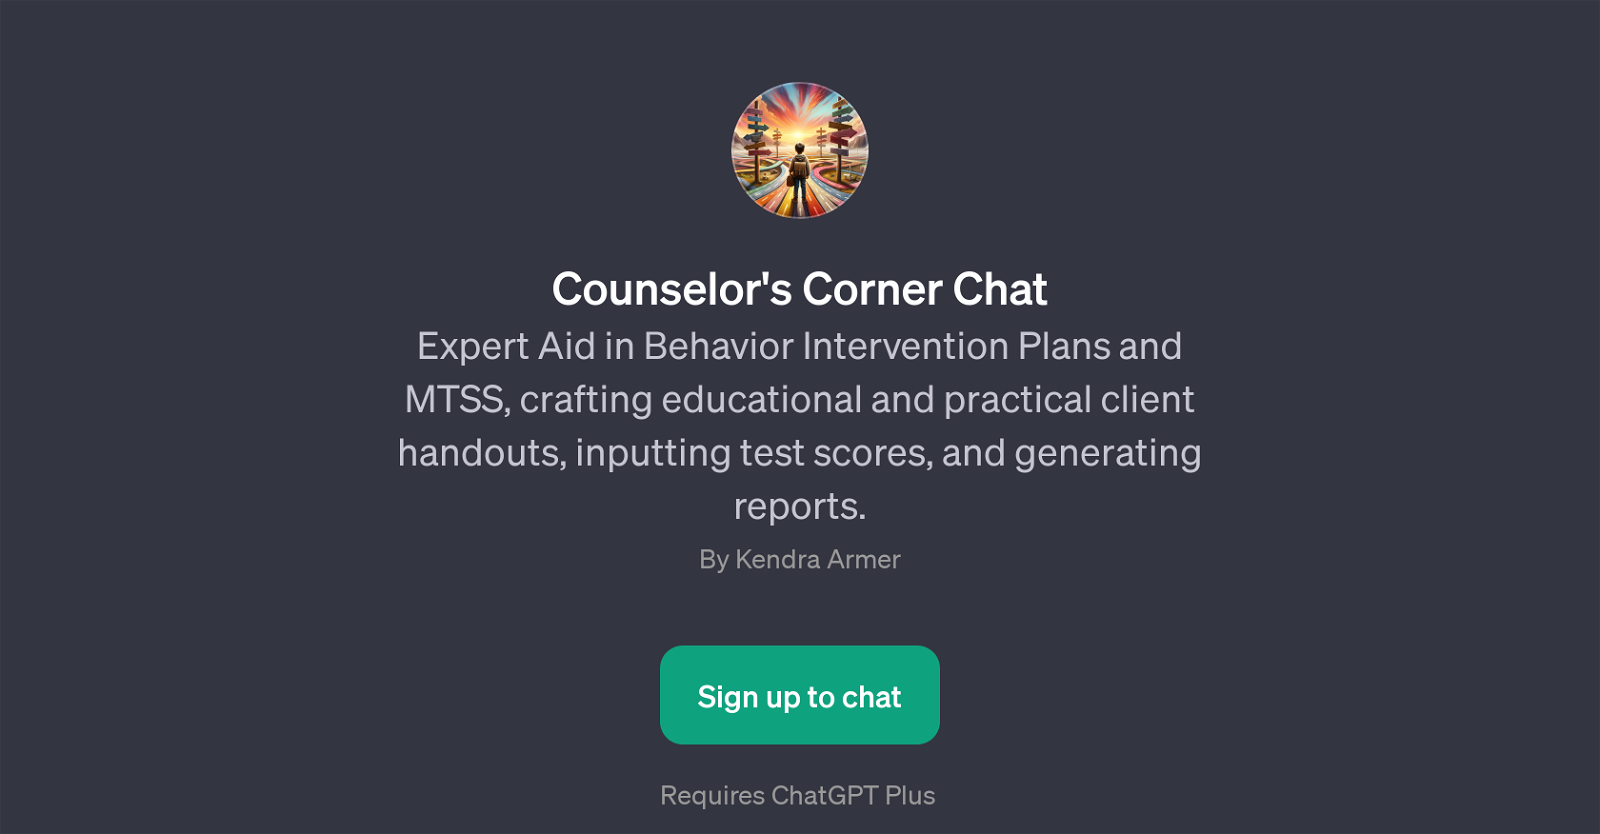 Counselor's Corner Chat website